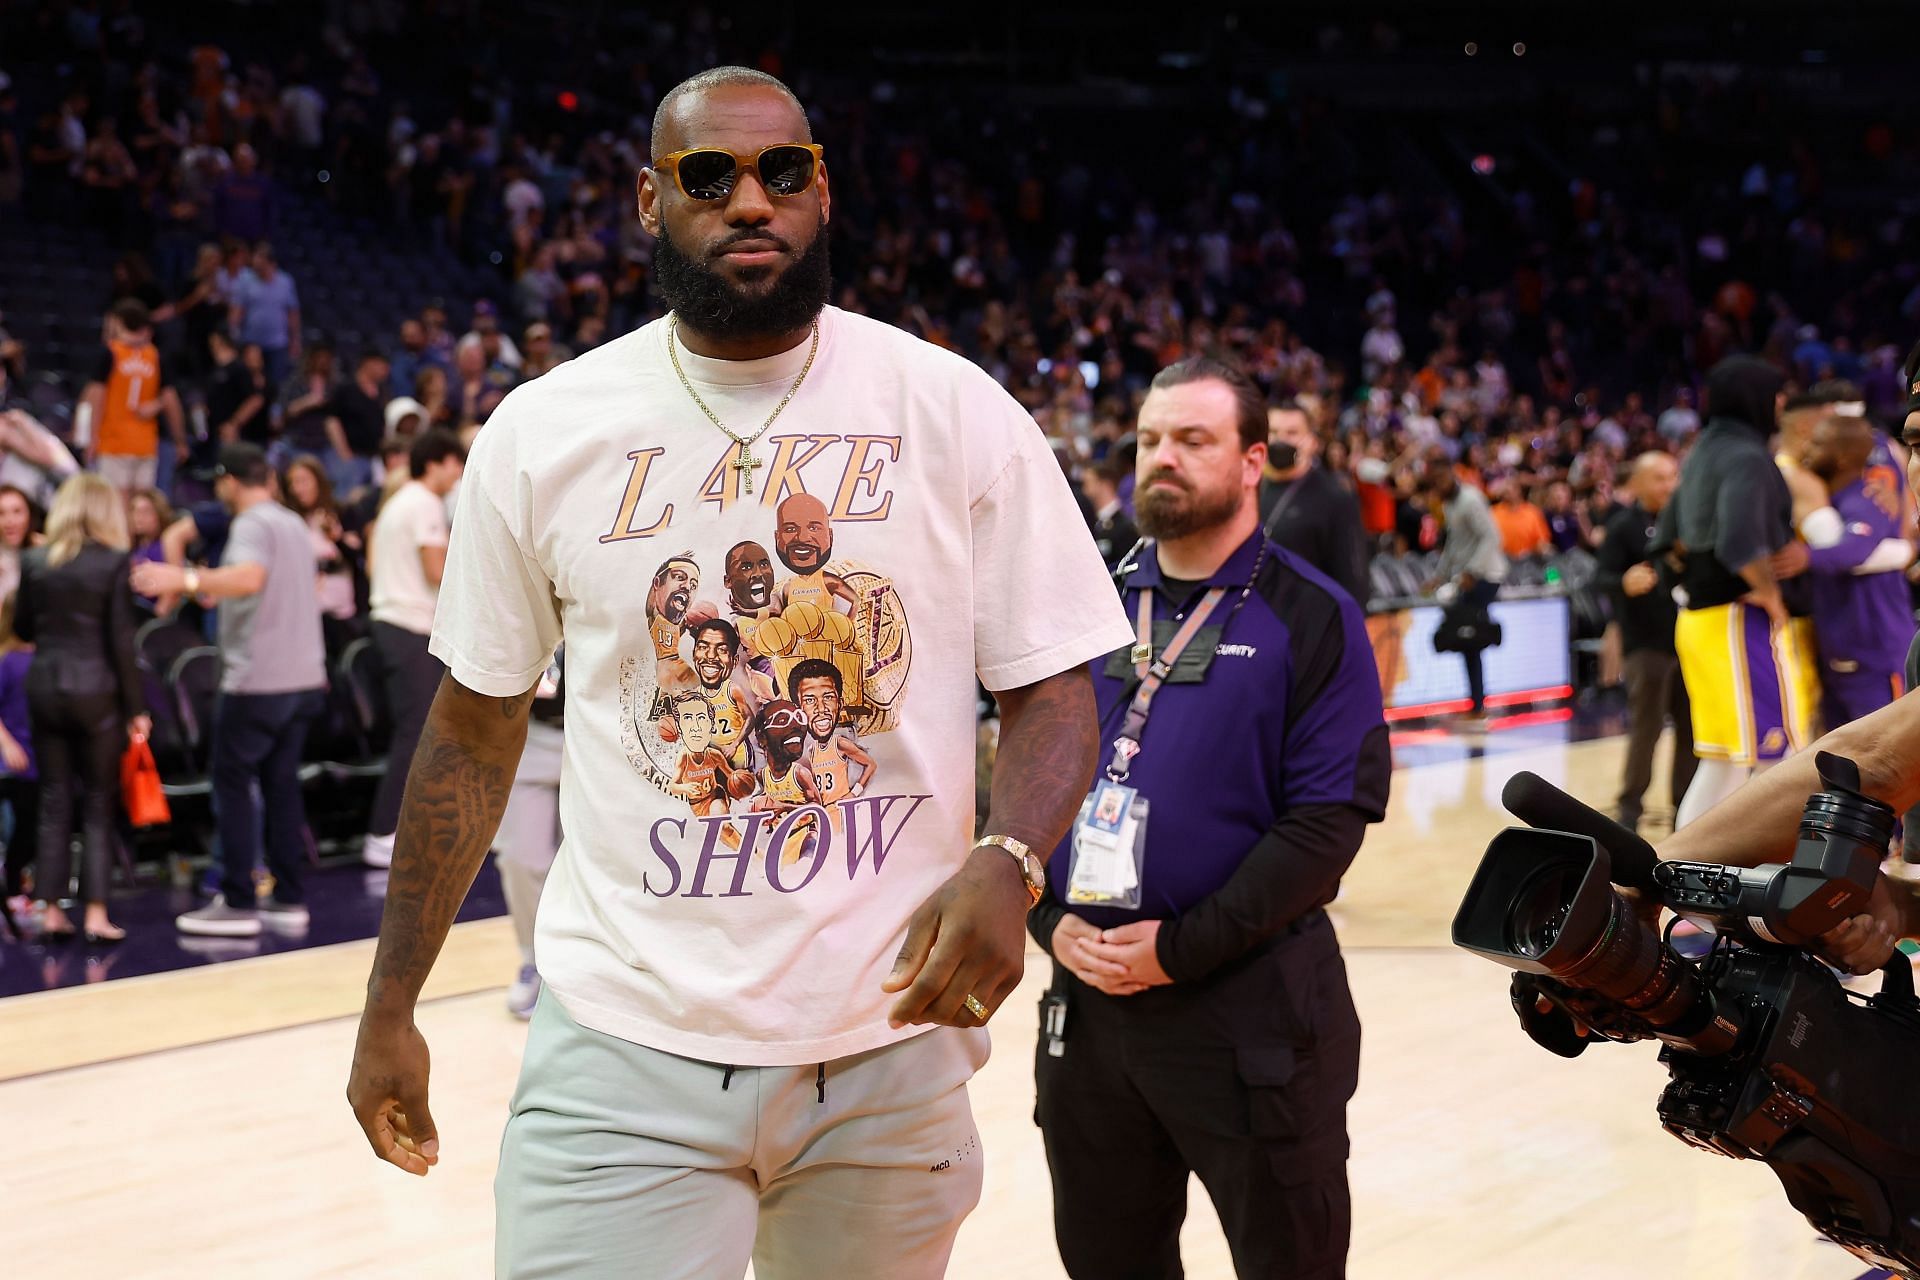 LeBron James #6 of the Los Angeles Lakers walks off the court following the NBA game against the Phoenix Suns at Footprint Center on April 05, 2022 in Phoenix, Arizona. The Suns defeated the Lakers 121-110.